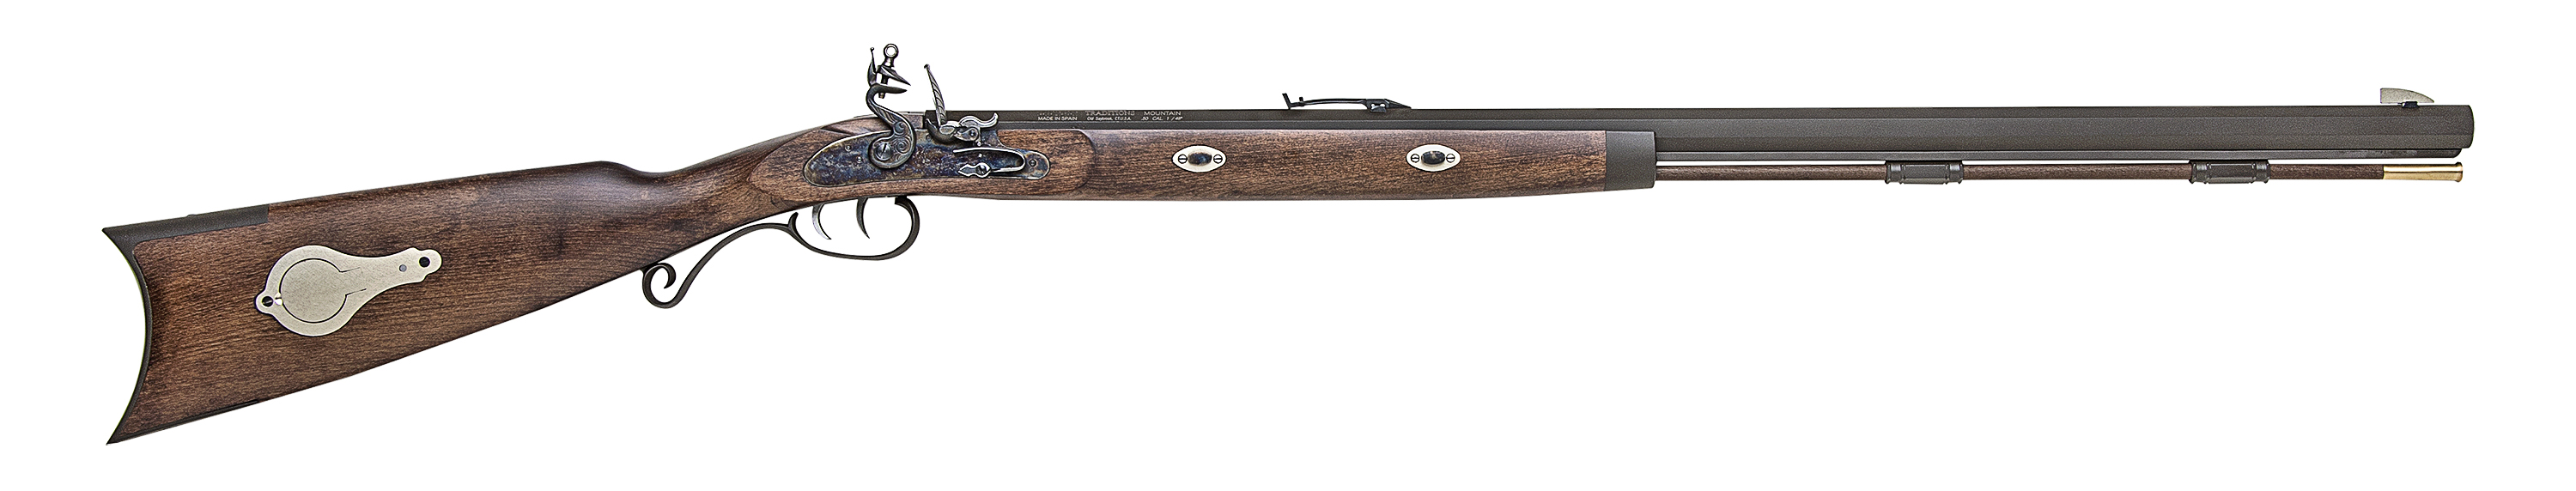 Traditions Mountain Rifle